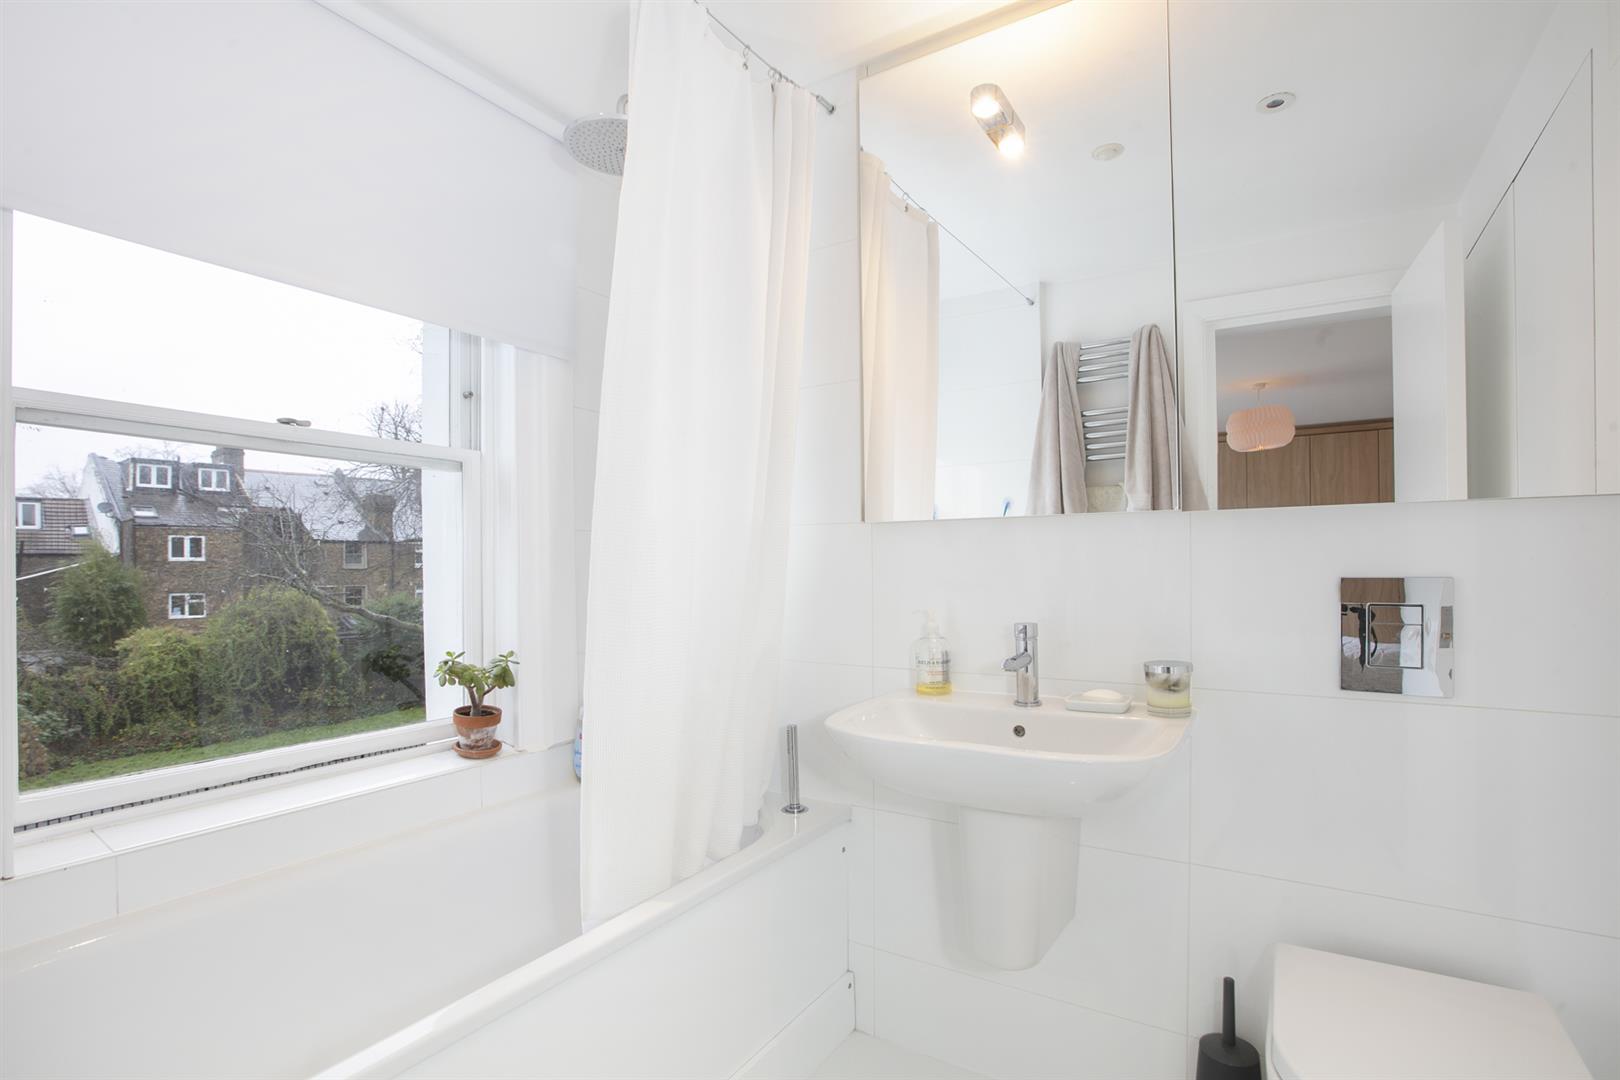 Flat - Conversion Under Offer in Holly Grove, Peckham, SE15 893 view16